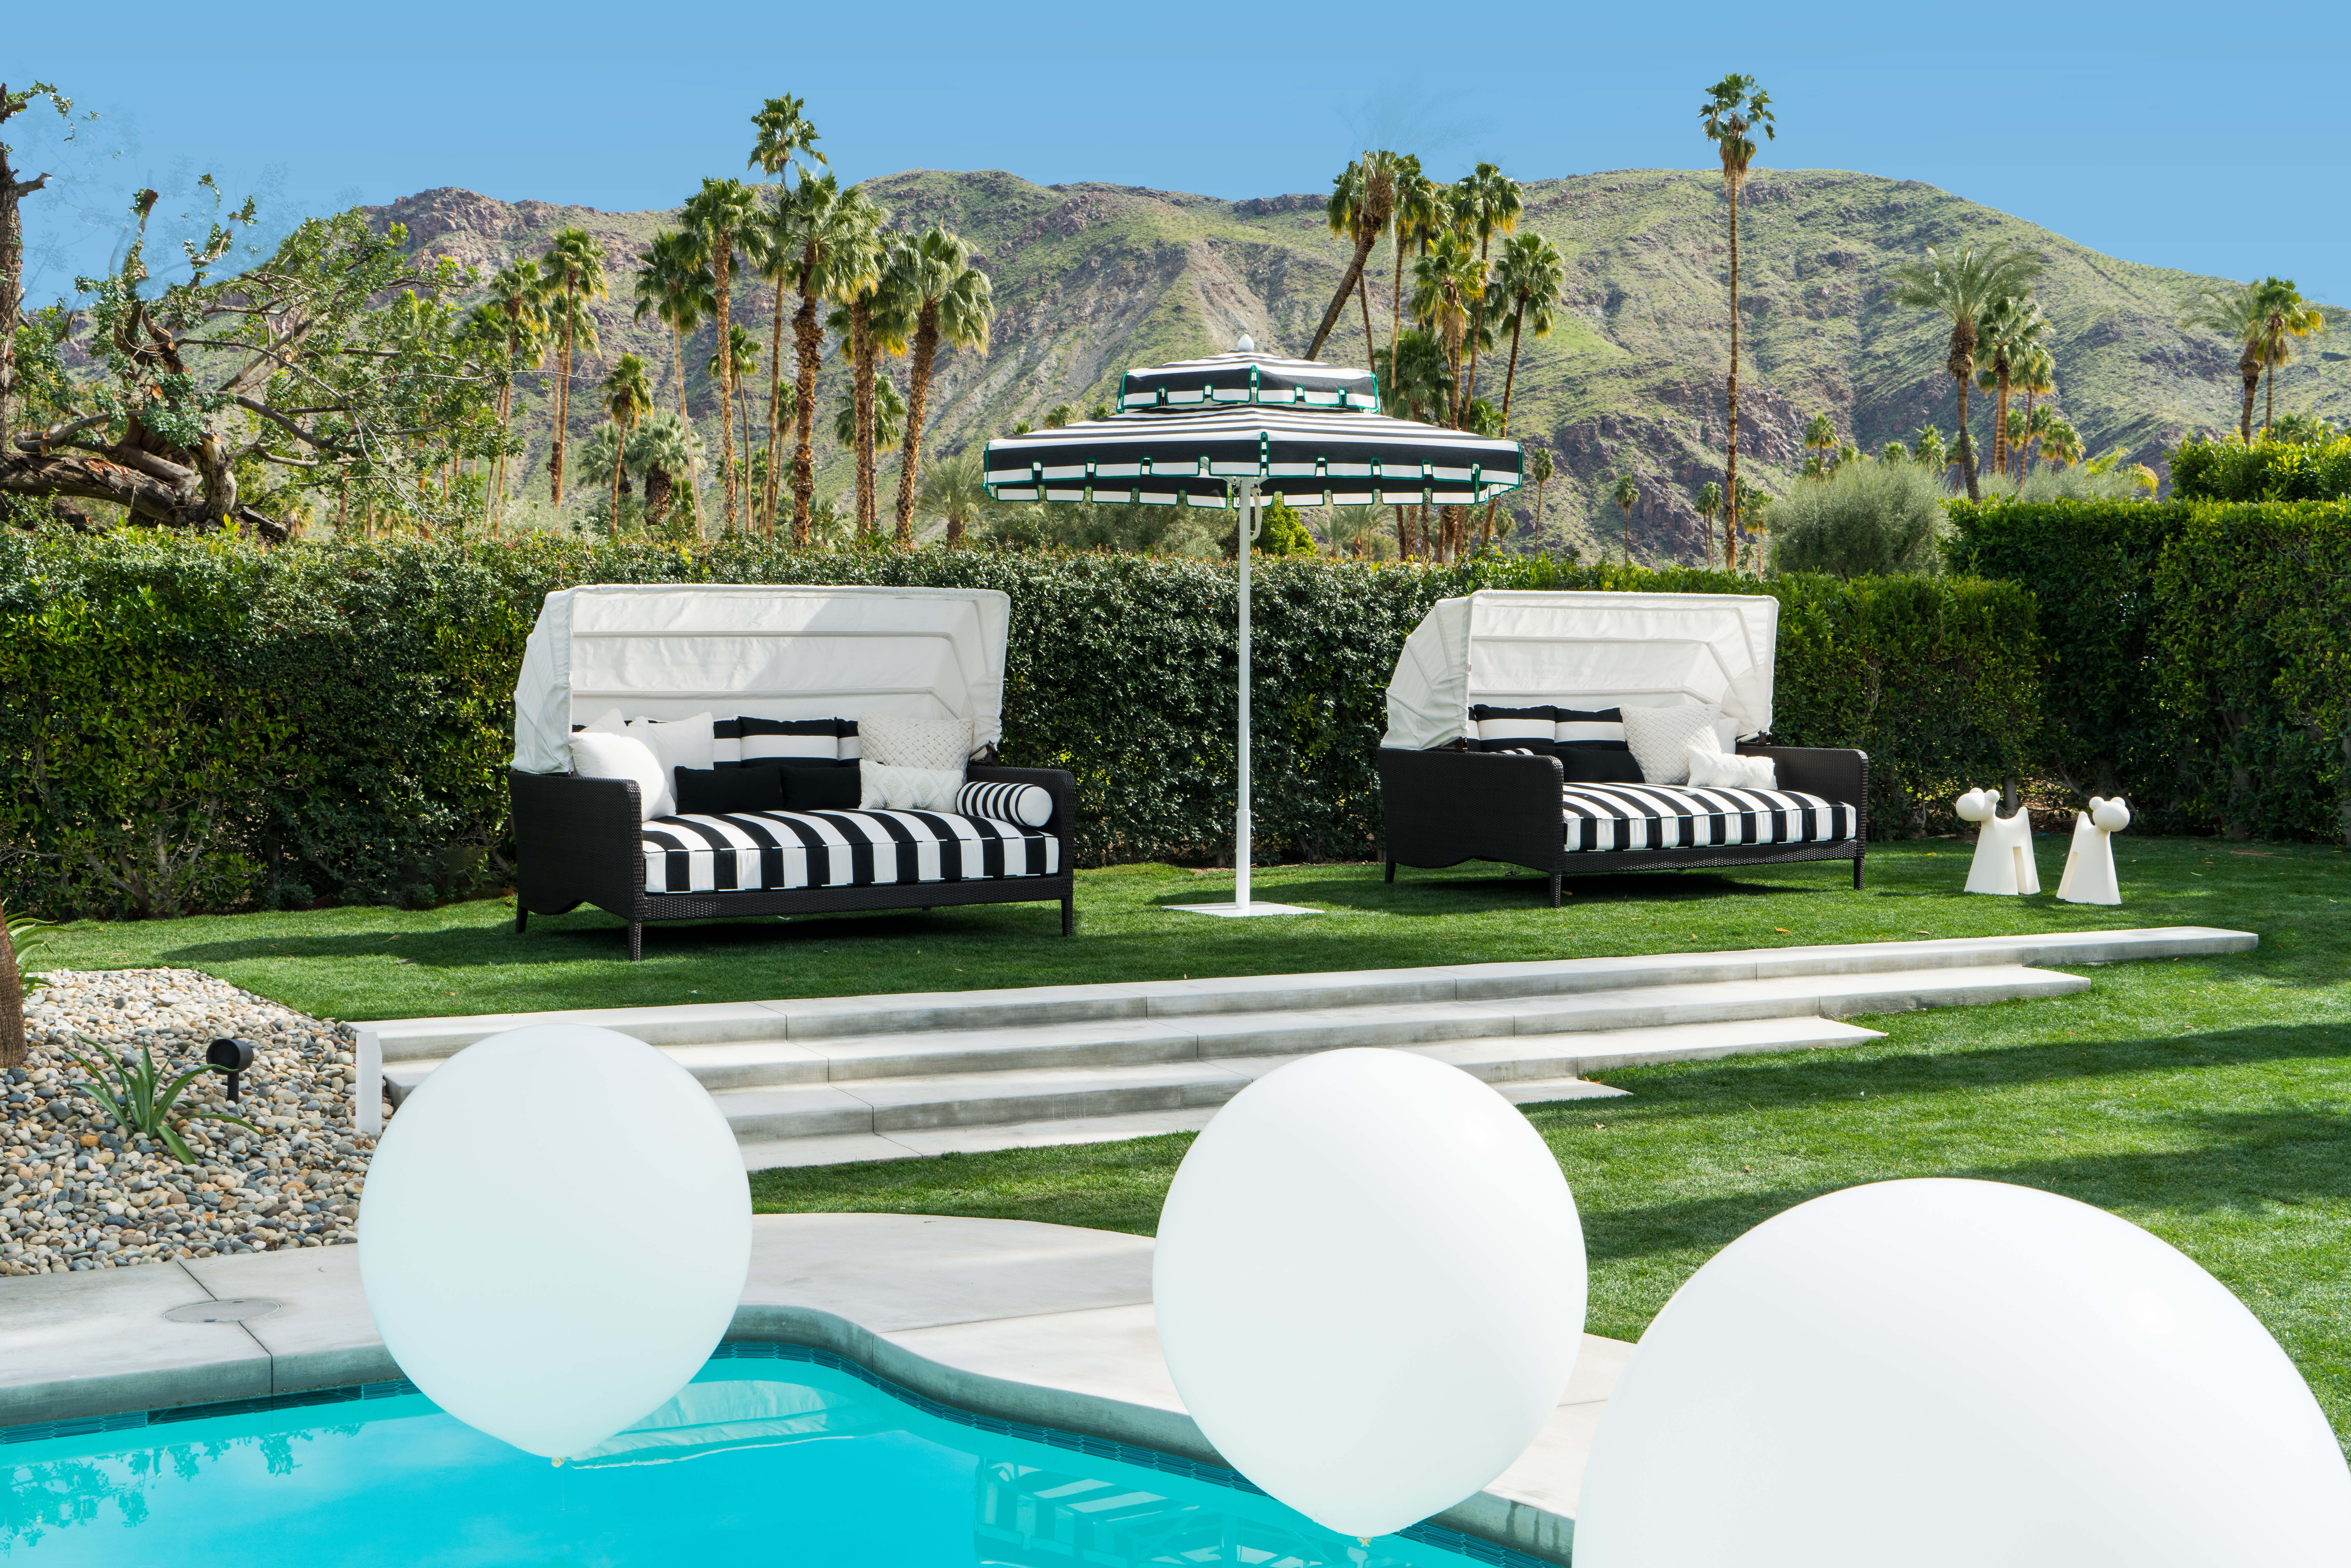 Loungers by the Pool Image